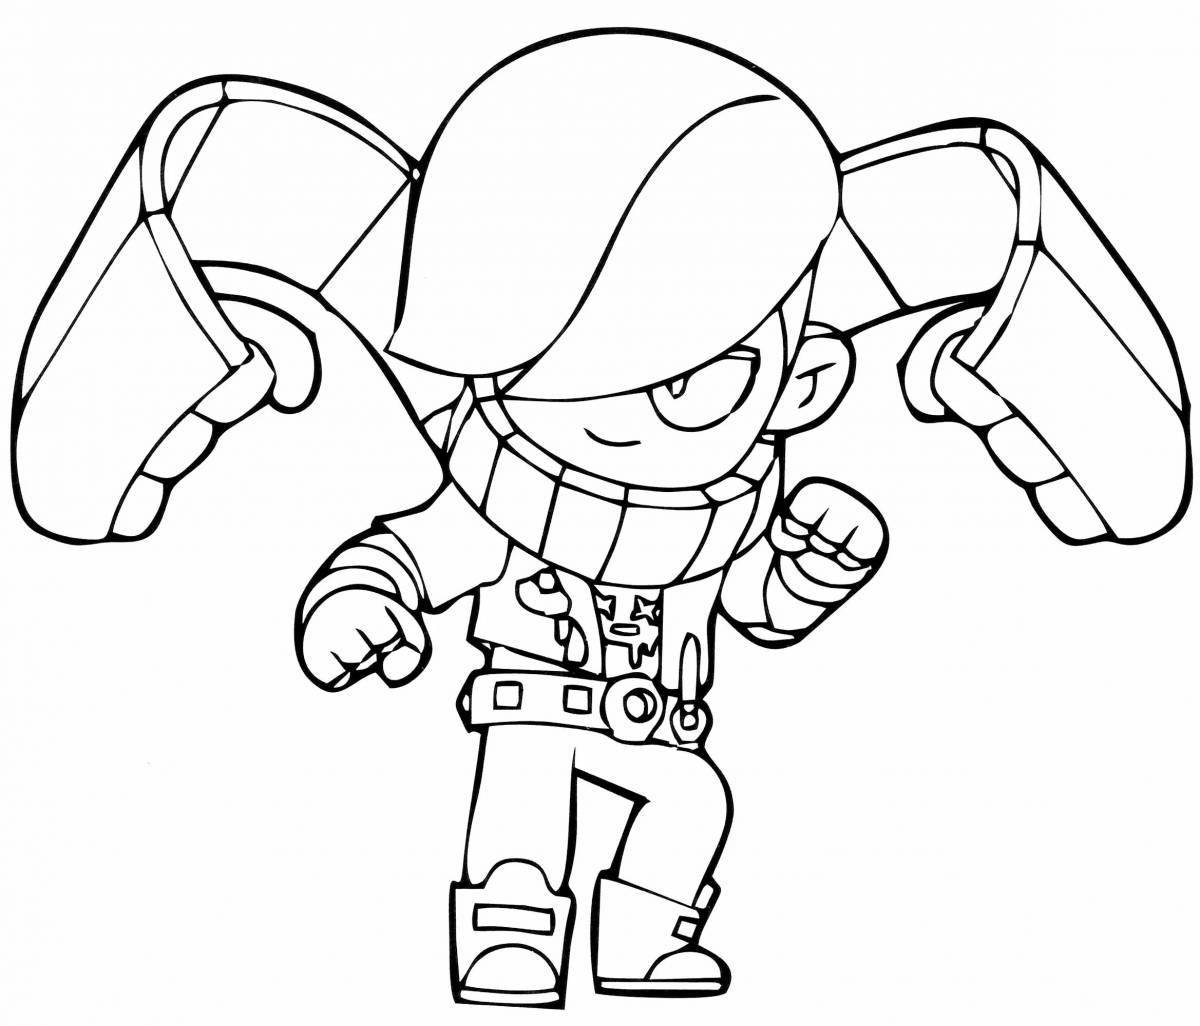 Brawl stars witty coloring pages